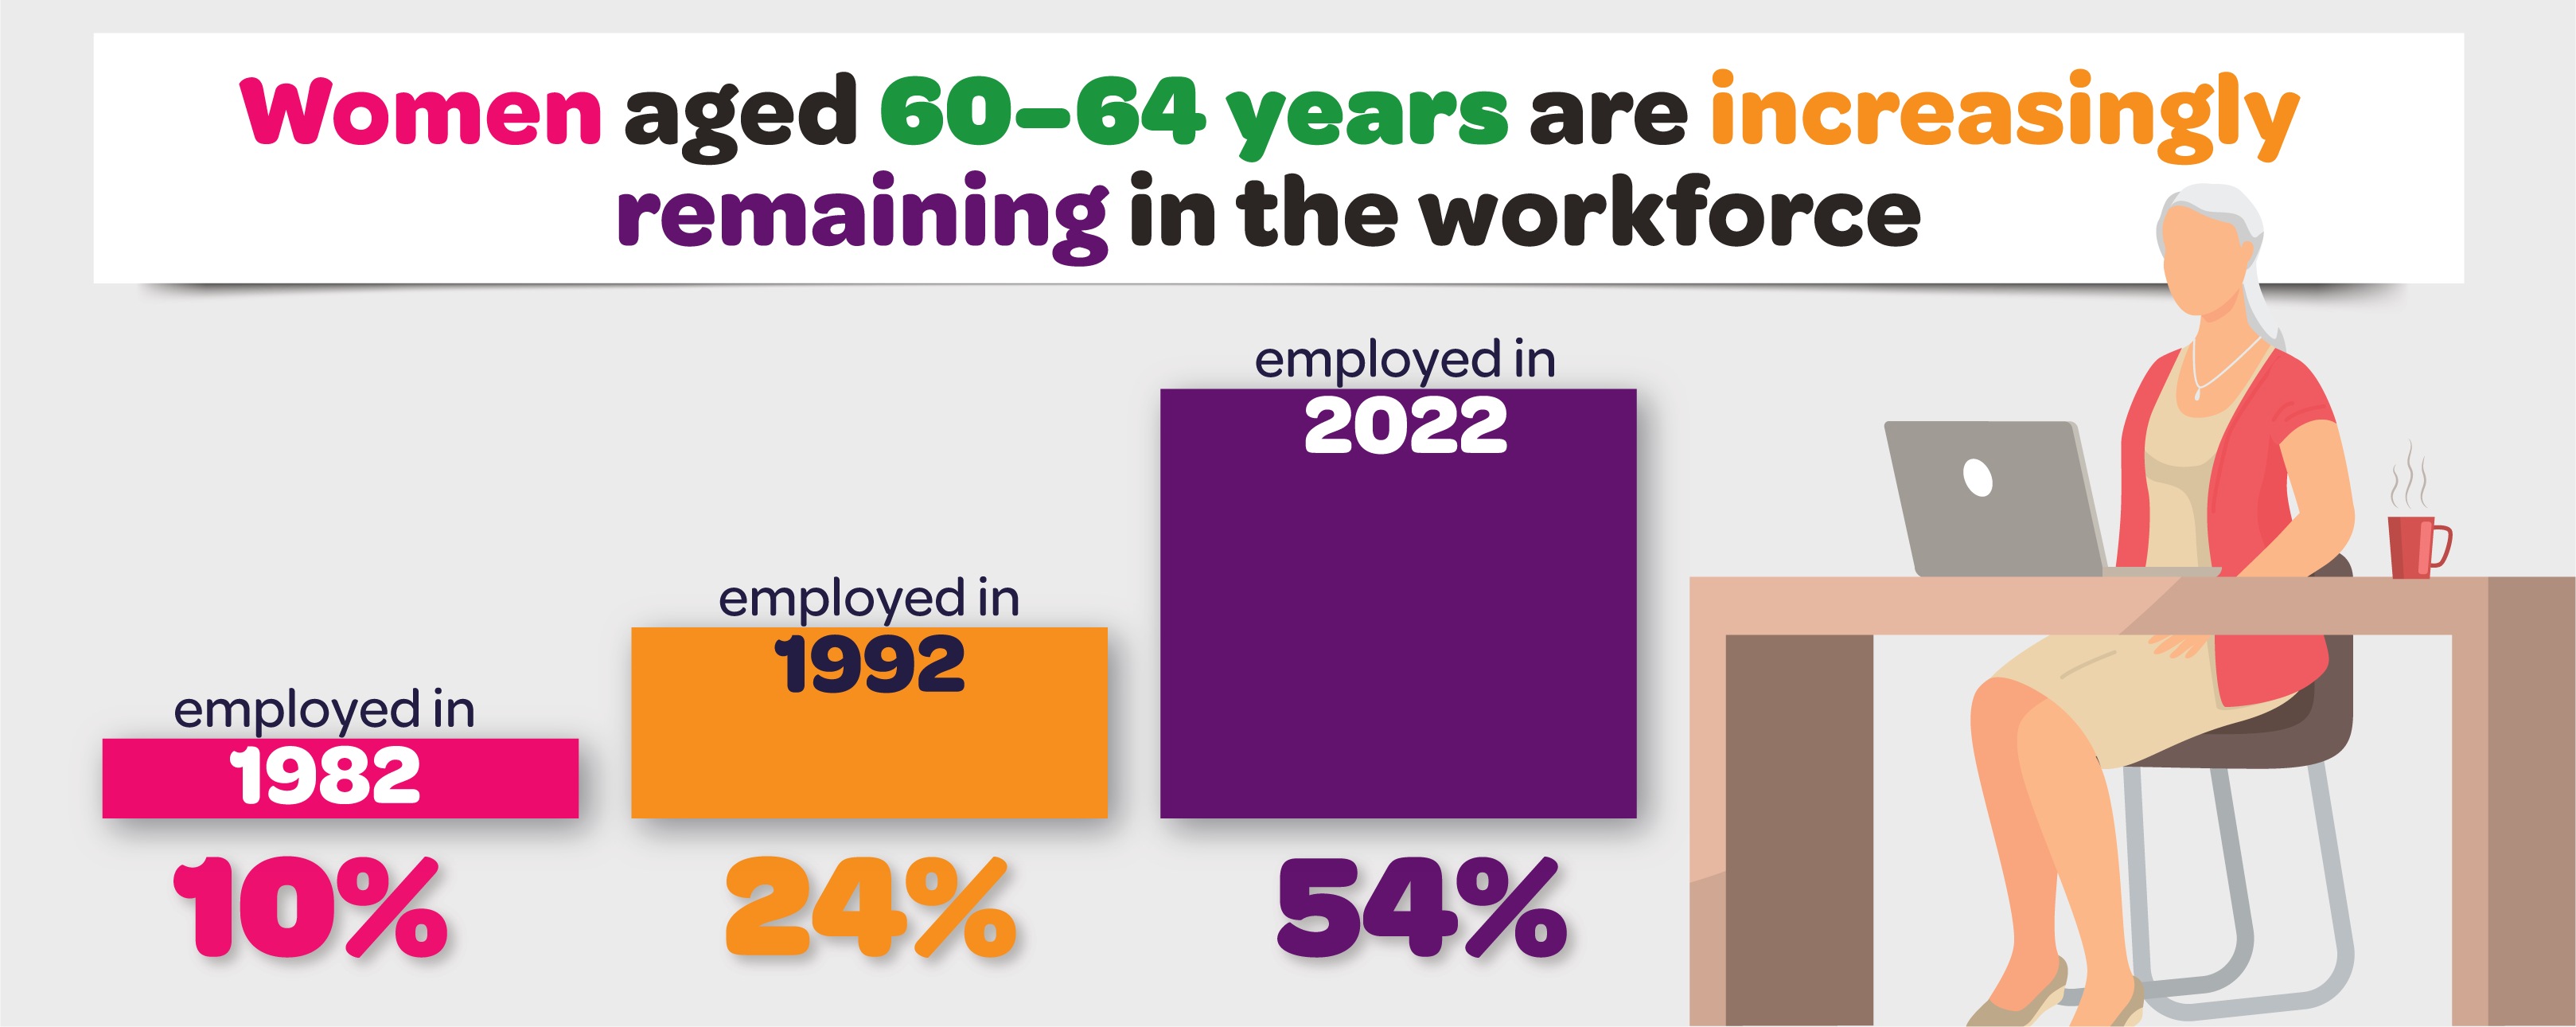 Infographic: Women aged 60-64 years are increasingly remaining in the workforce: Employed in 1982-10%; Employed in 1992-24%; Employed in 2022-54%.